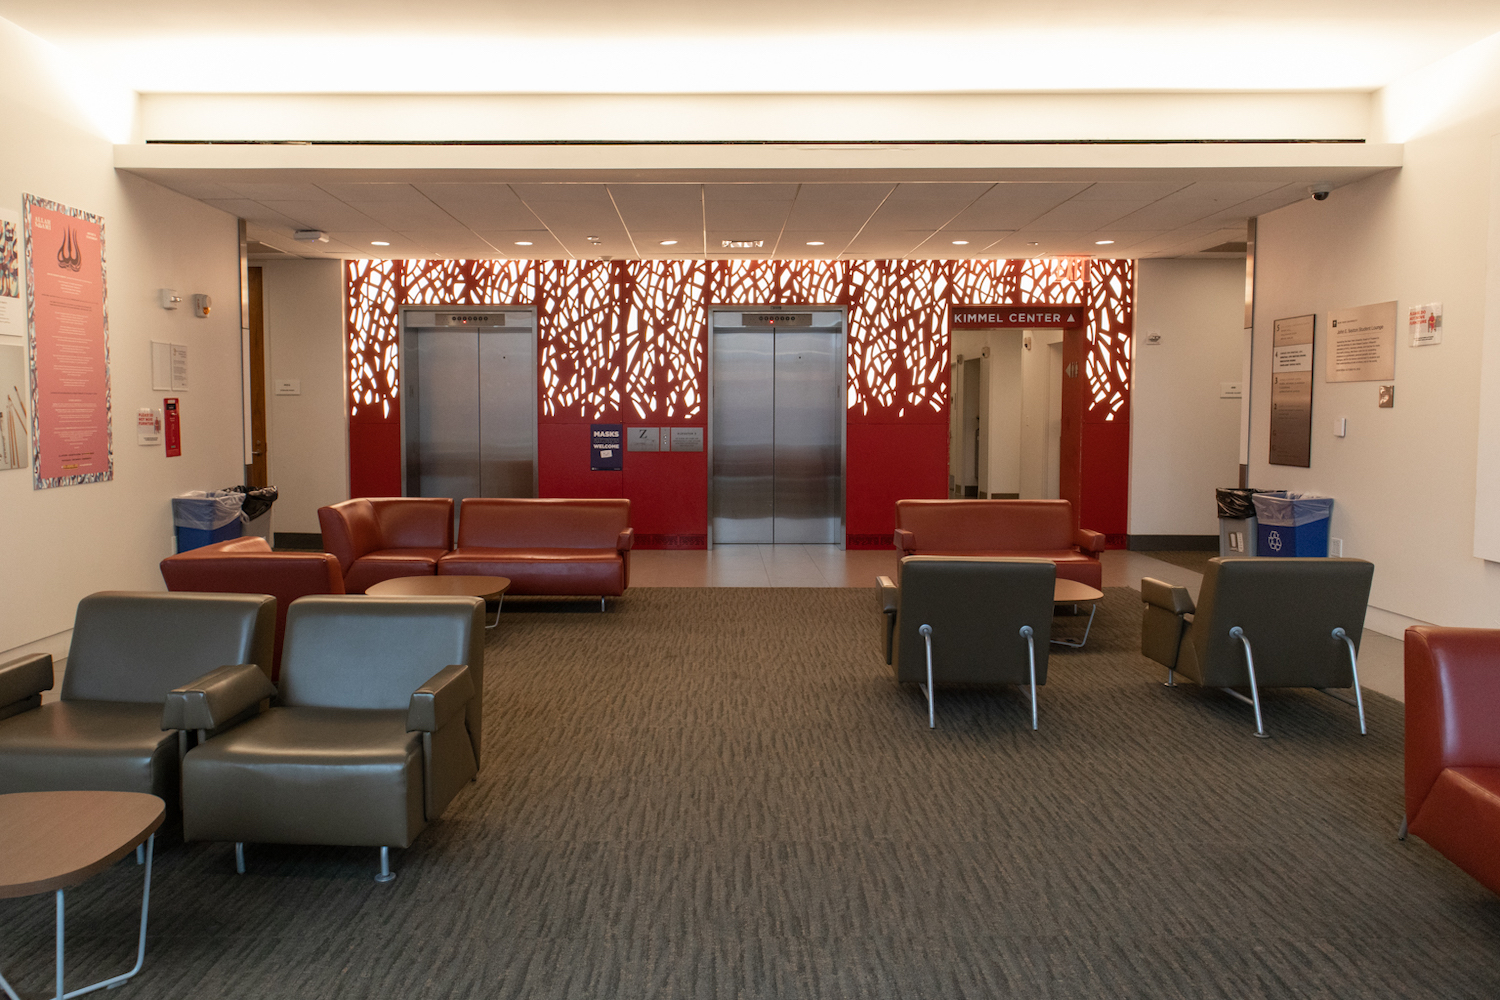 A photo of vacant leather couches in an empty lounge at the NYU Global Center for Academic and Spiritual Life with two elevators against bright red walls.